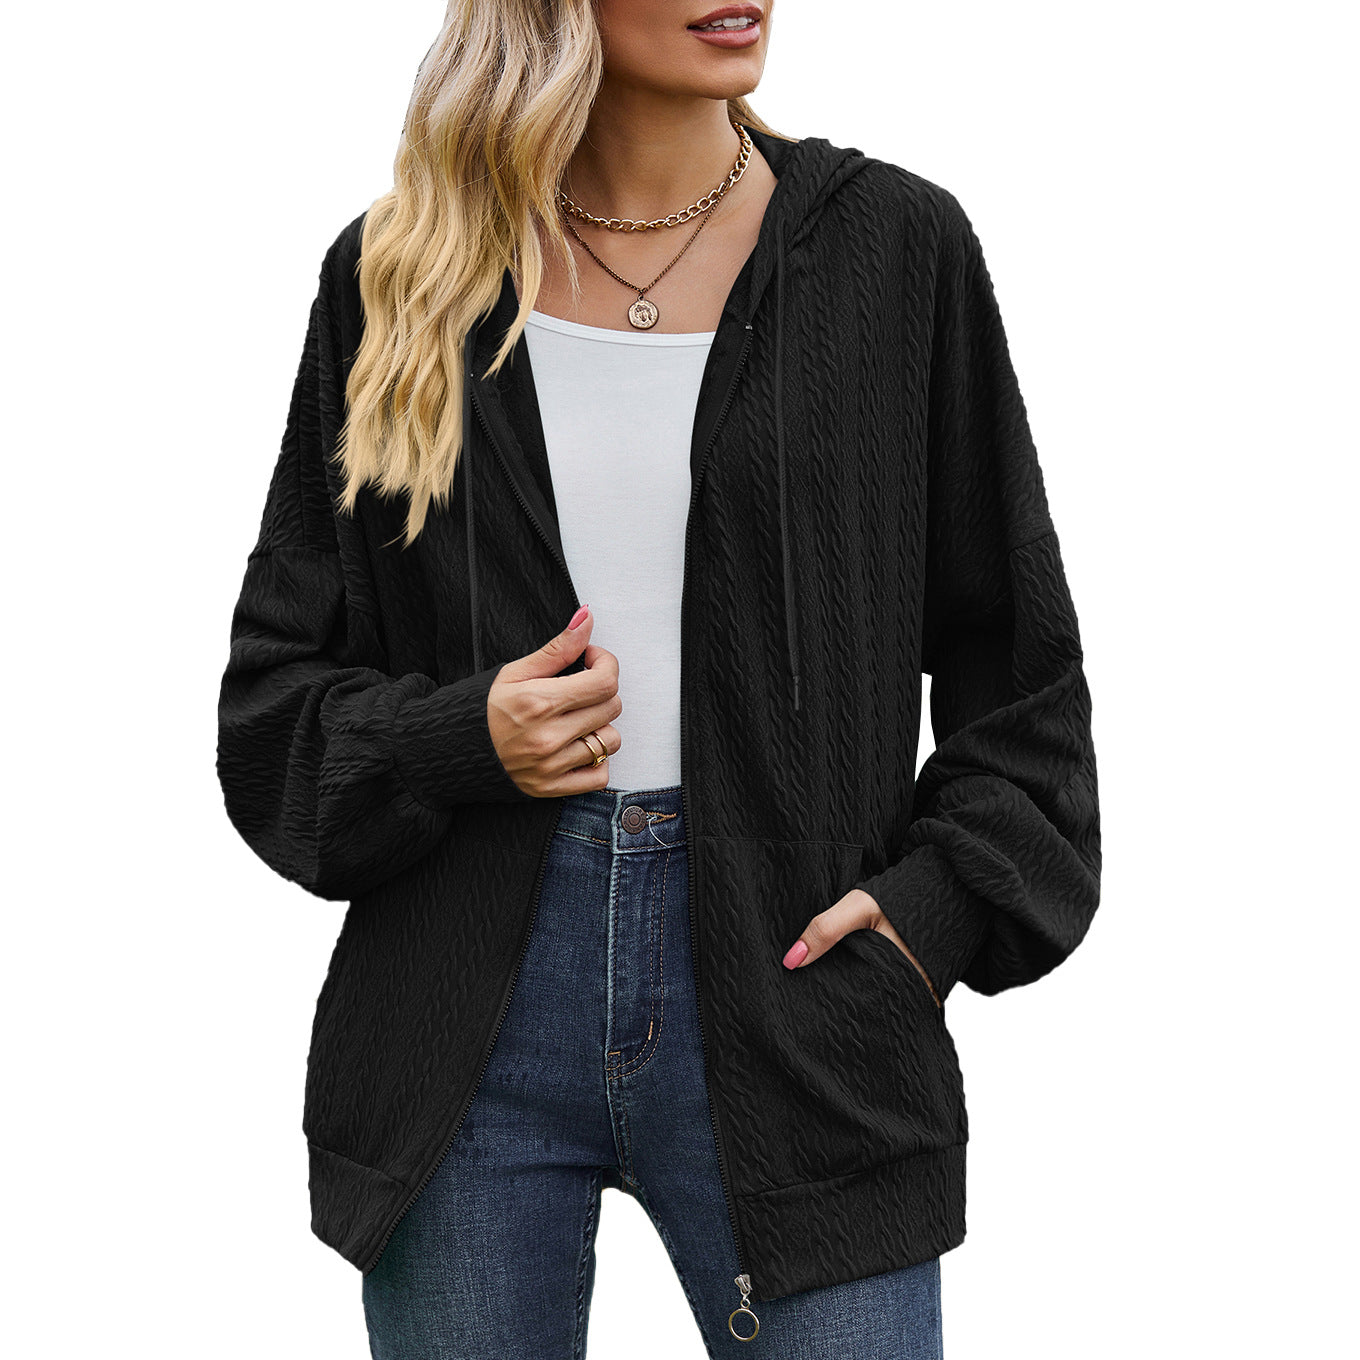 Autumn Winter Solid Color Pocket Long Sleeve Loose Hooded Sweater Women Coat